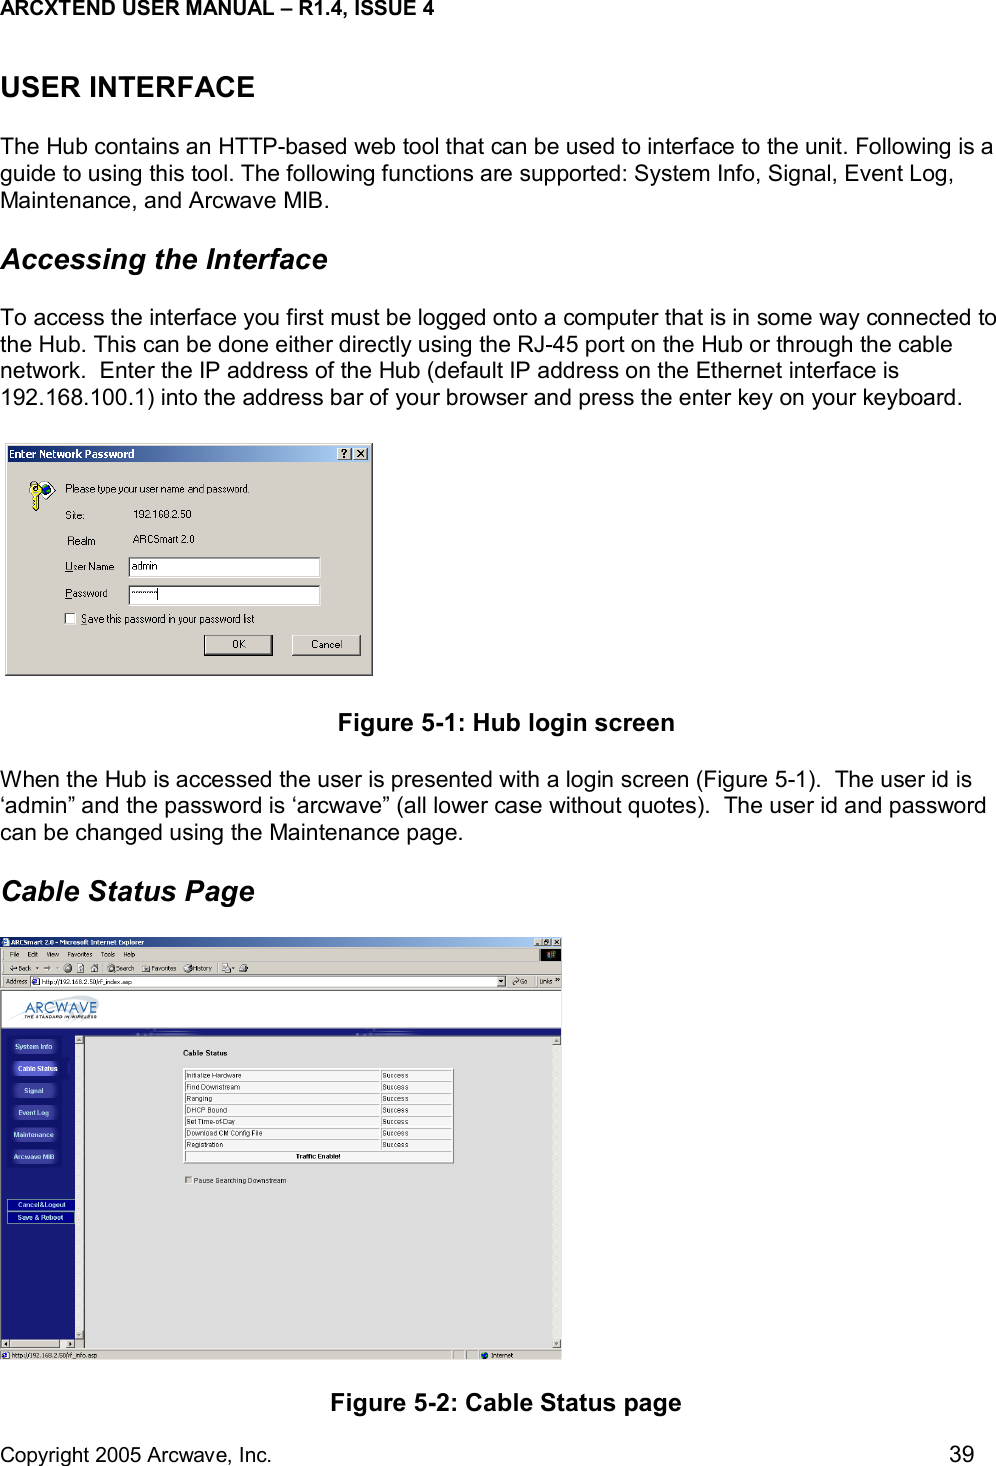 ARCXTEND USER MANUAL – R1.4, ISSUE 4  Copyright 2005 Arcwave, Inc.    39 USER INTERFACE  The Hub contains an HTTP-based web tool that can be used to interface to the unit. Following is a guide to using this tool. The following functions are supported: System Info, Signal, Event Log, Maintenance, and Arcwave MIB. Accessing the Interface To access the interface you first must be logged onto a computer that is in some way connected to the Hub. This can be done either directly using the RJ-45 port on the Hub or through the cable network.  Enter the IP address of the Hub (default IP address on the Ethernet interface is 192.168.100.1) into the address bar of your browser and press the enter key on your keyboard.   Figure 5-1: Hub login screen  When the Hub is accessed the user is presented with a login screen (Figure 5-1).  The user id is ‘admin” and the password is ‘arcwave” (all lower case without quotes).  The user id and password can be changed using the Maintenance page. Cable Status Page  Figure 5-2: Cable Status page 